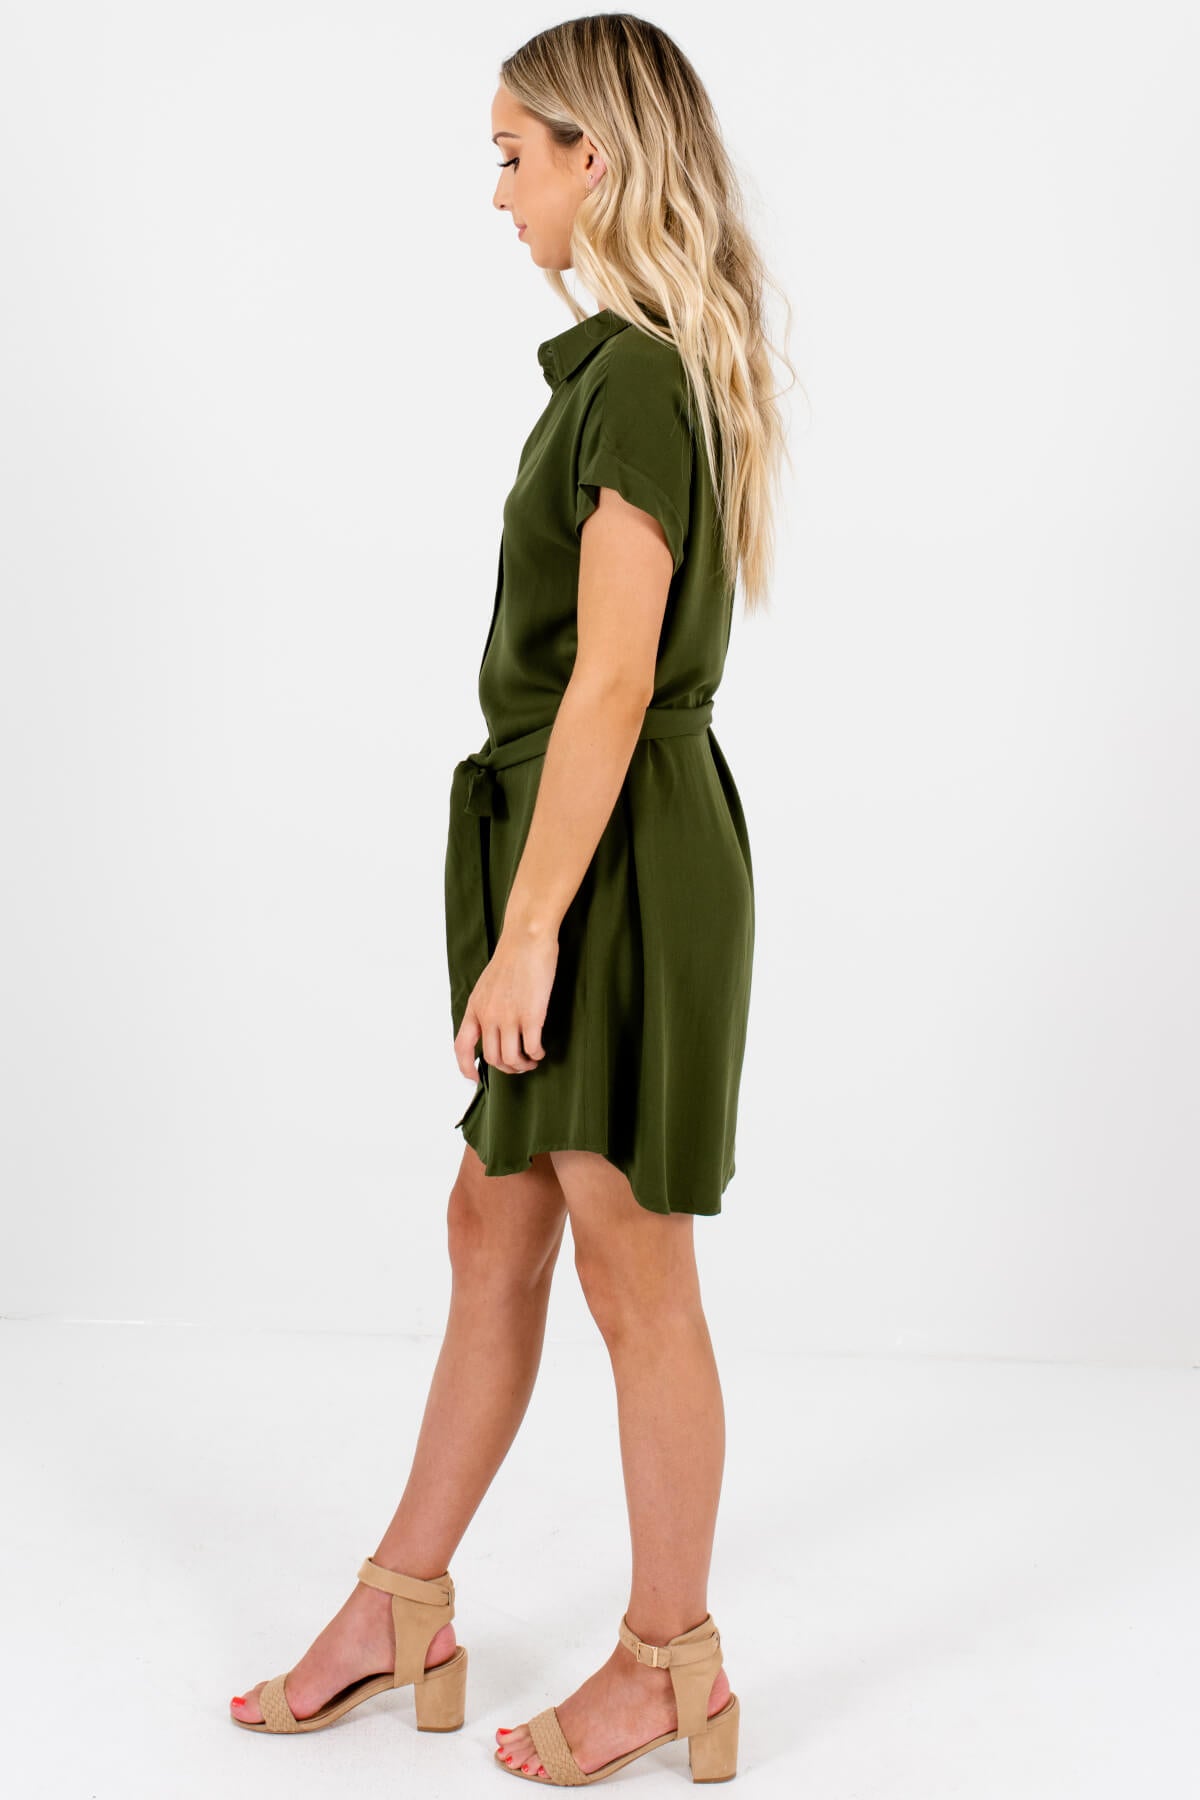 Olive Green Button Up Mini Shirt Dresses Affordable Boutique